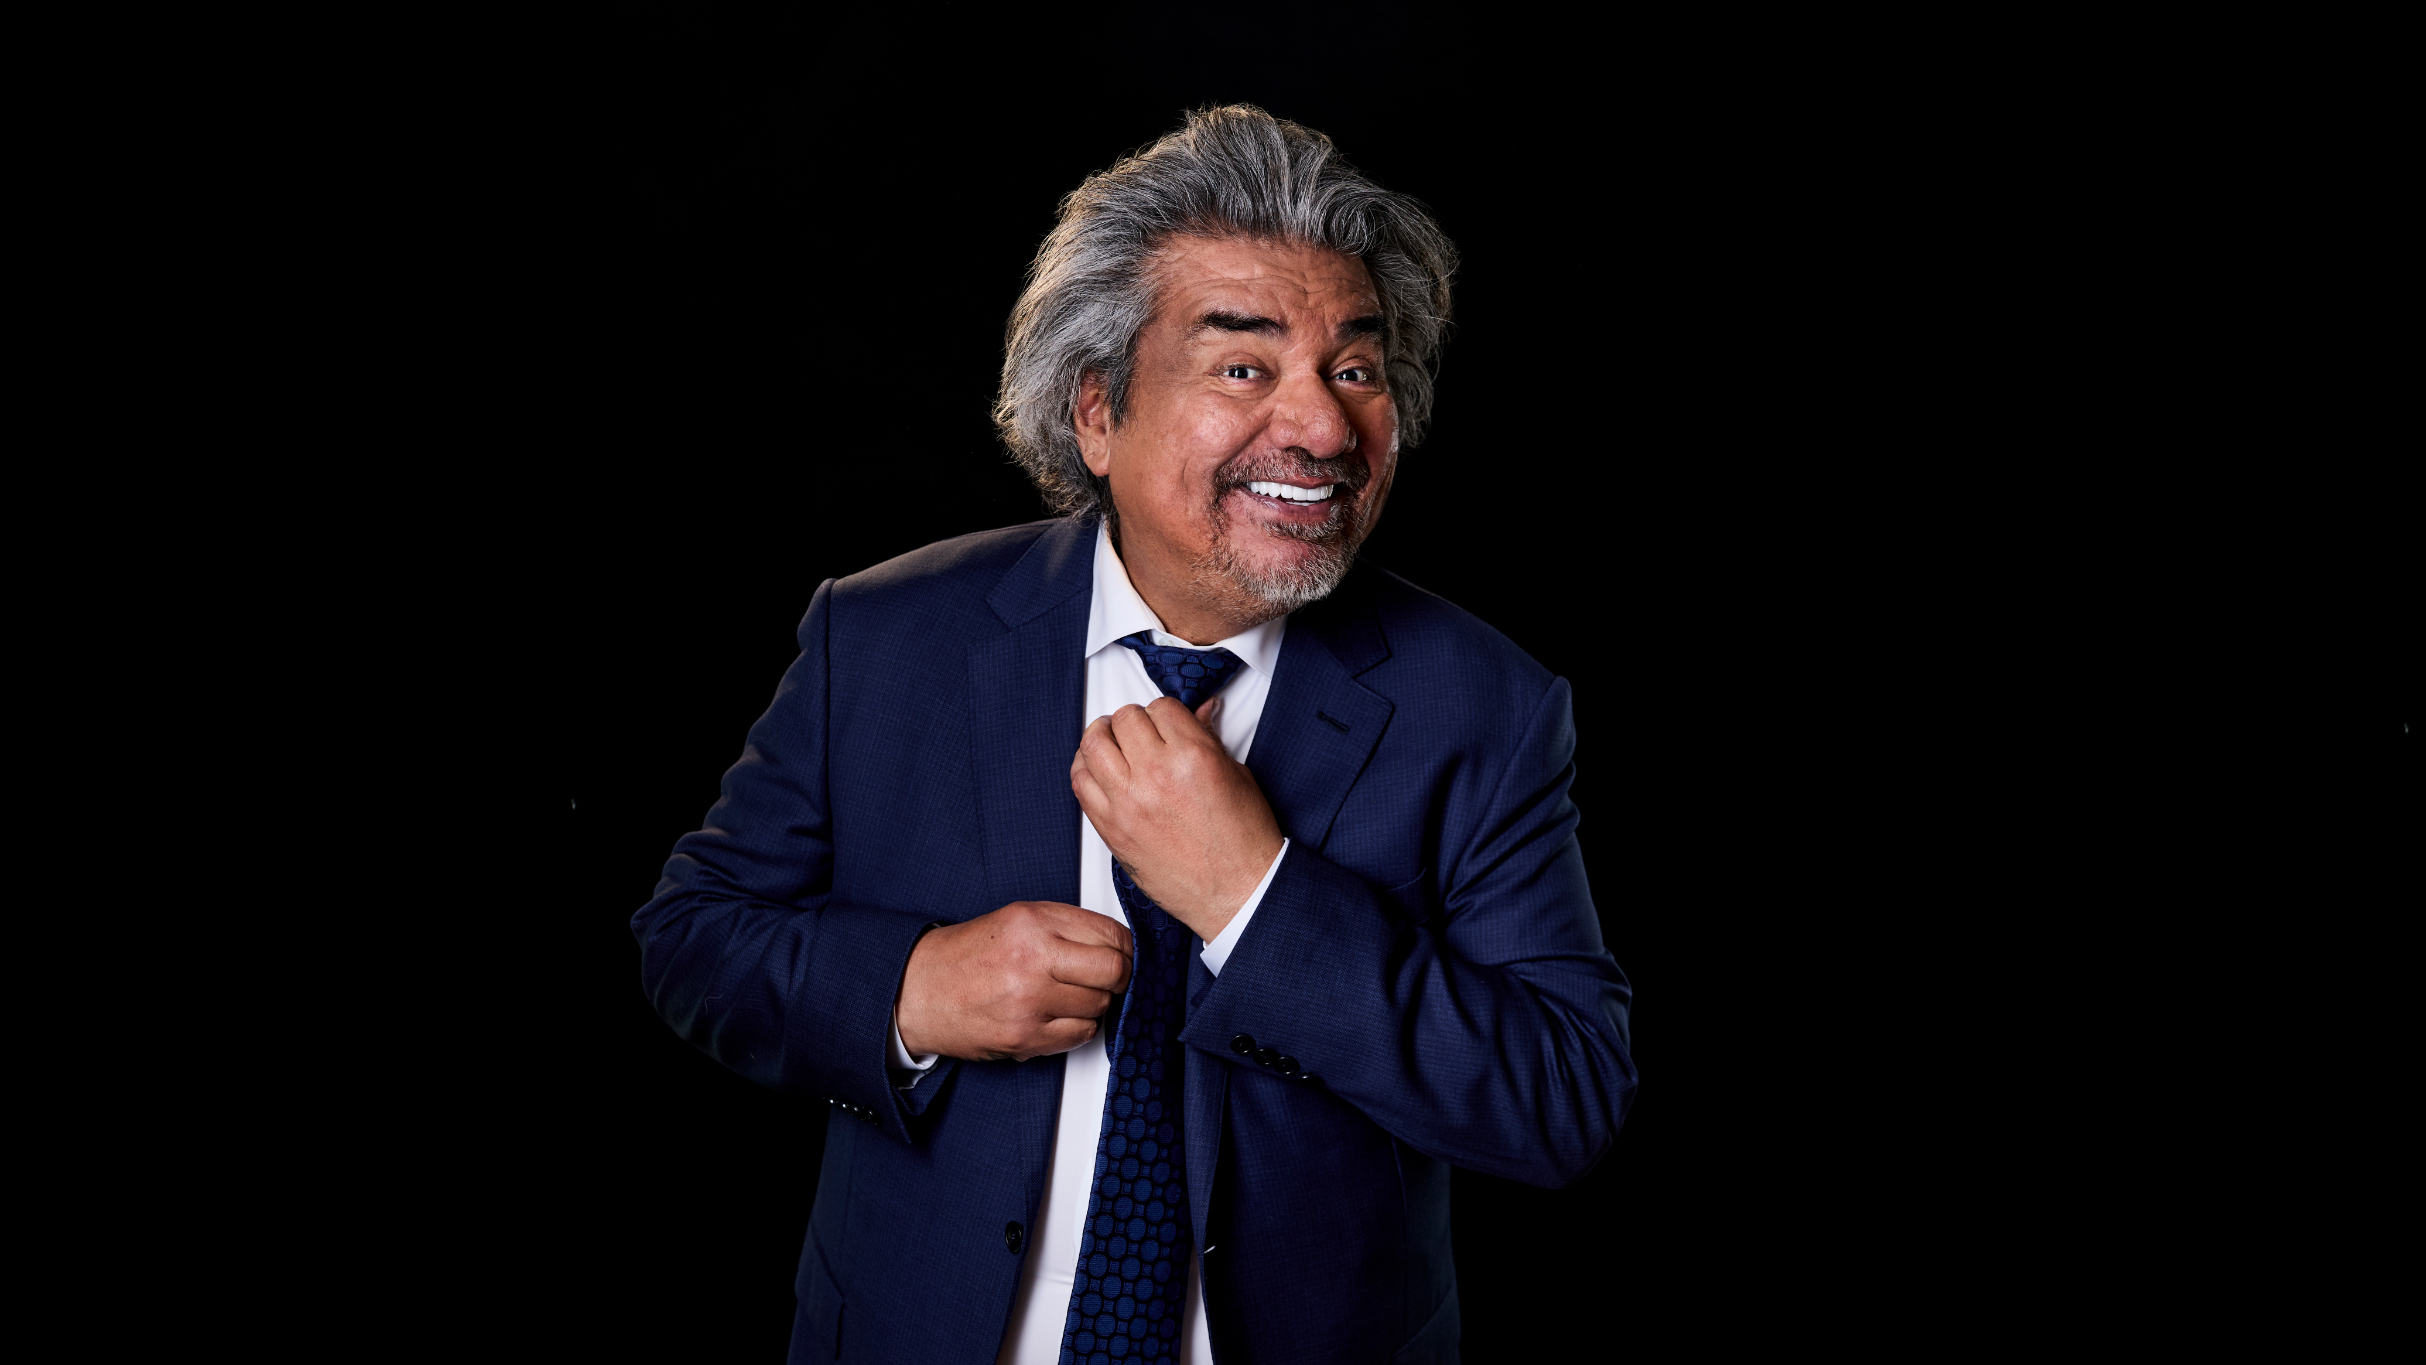 George Lopez: Alllriiiighhttt! in Hollywood promo photo for Dolby Theatre presale offer code